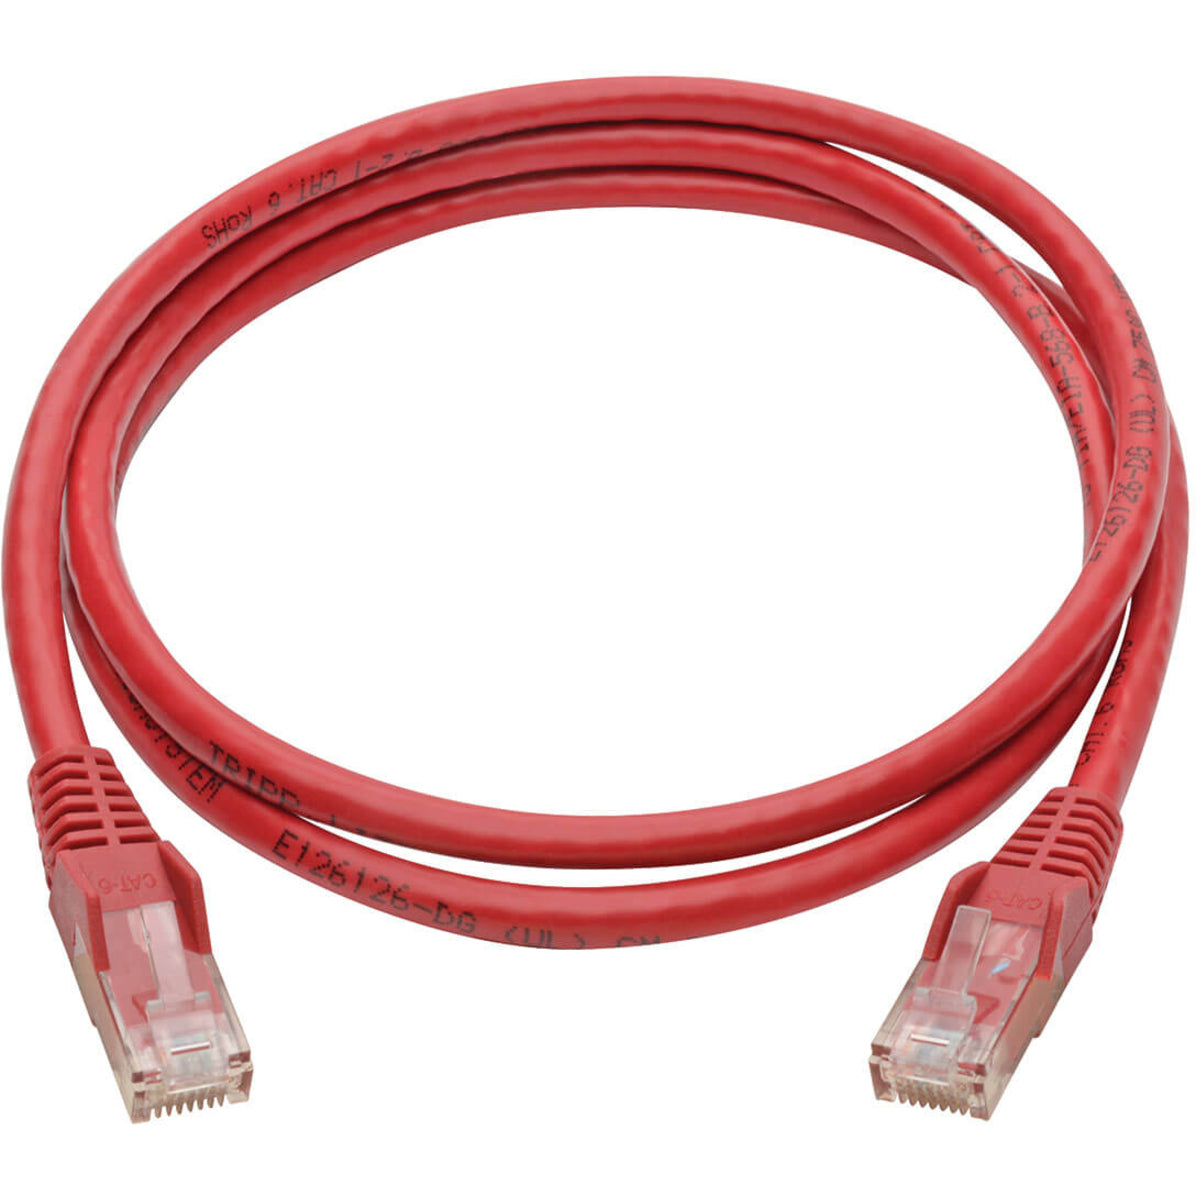 Tripp Lite N201-004-RD Cat.6 UTP Patch Network Cable 4 ft Gigabit Snagless Red Tripp Lite N201-004-RD Cavo di rete patch UTP Cat.6 4 ft Gigabit Snagless Rosso